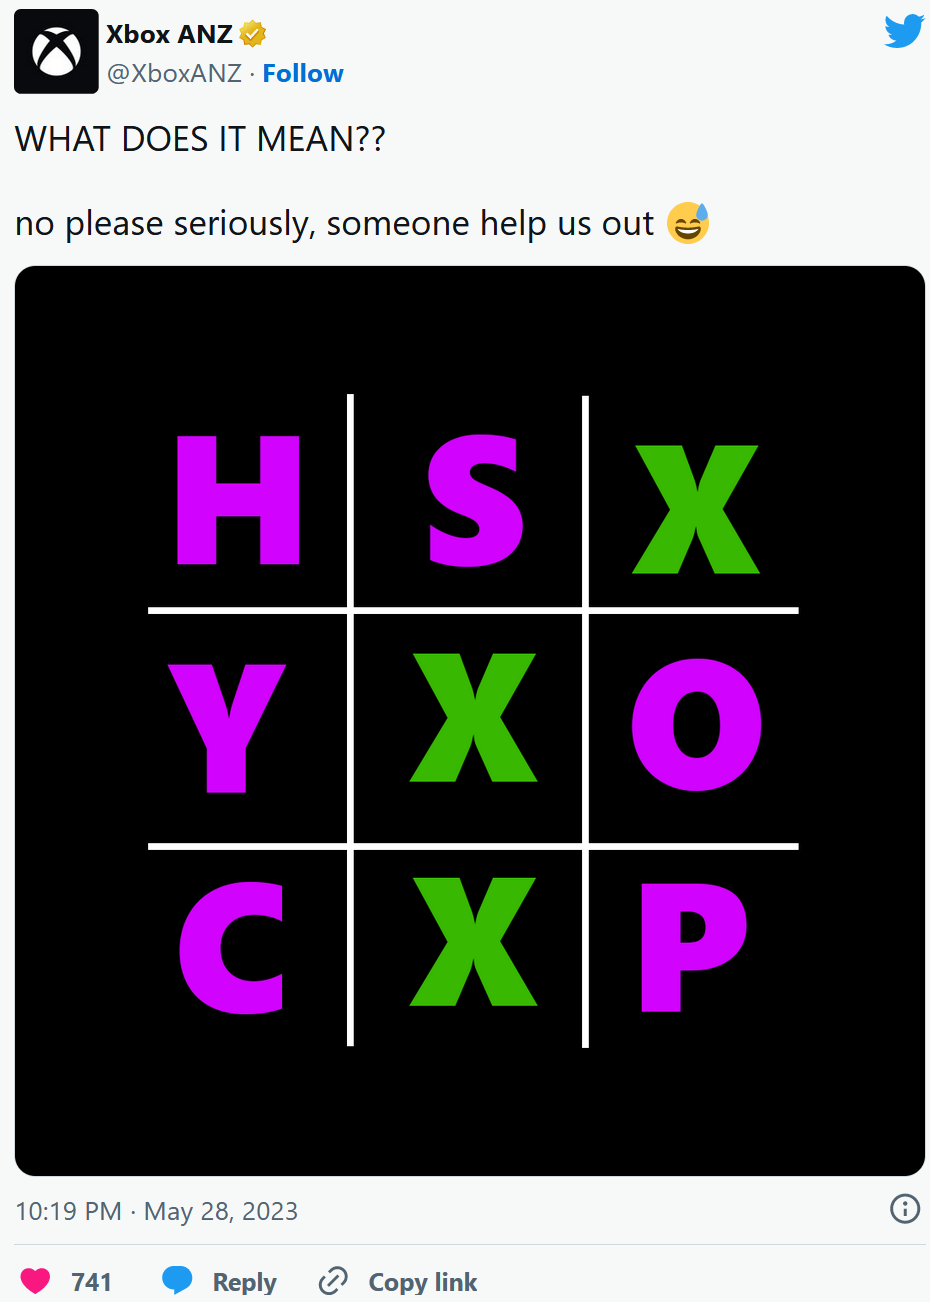 Tweet says: "WHAT DOES IT MEAN?? no seriously someone help us out" and shows tic-tac-toe that says "PSYCHOXXX"